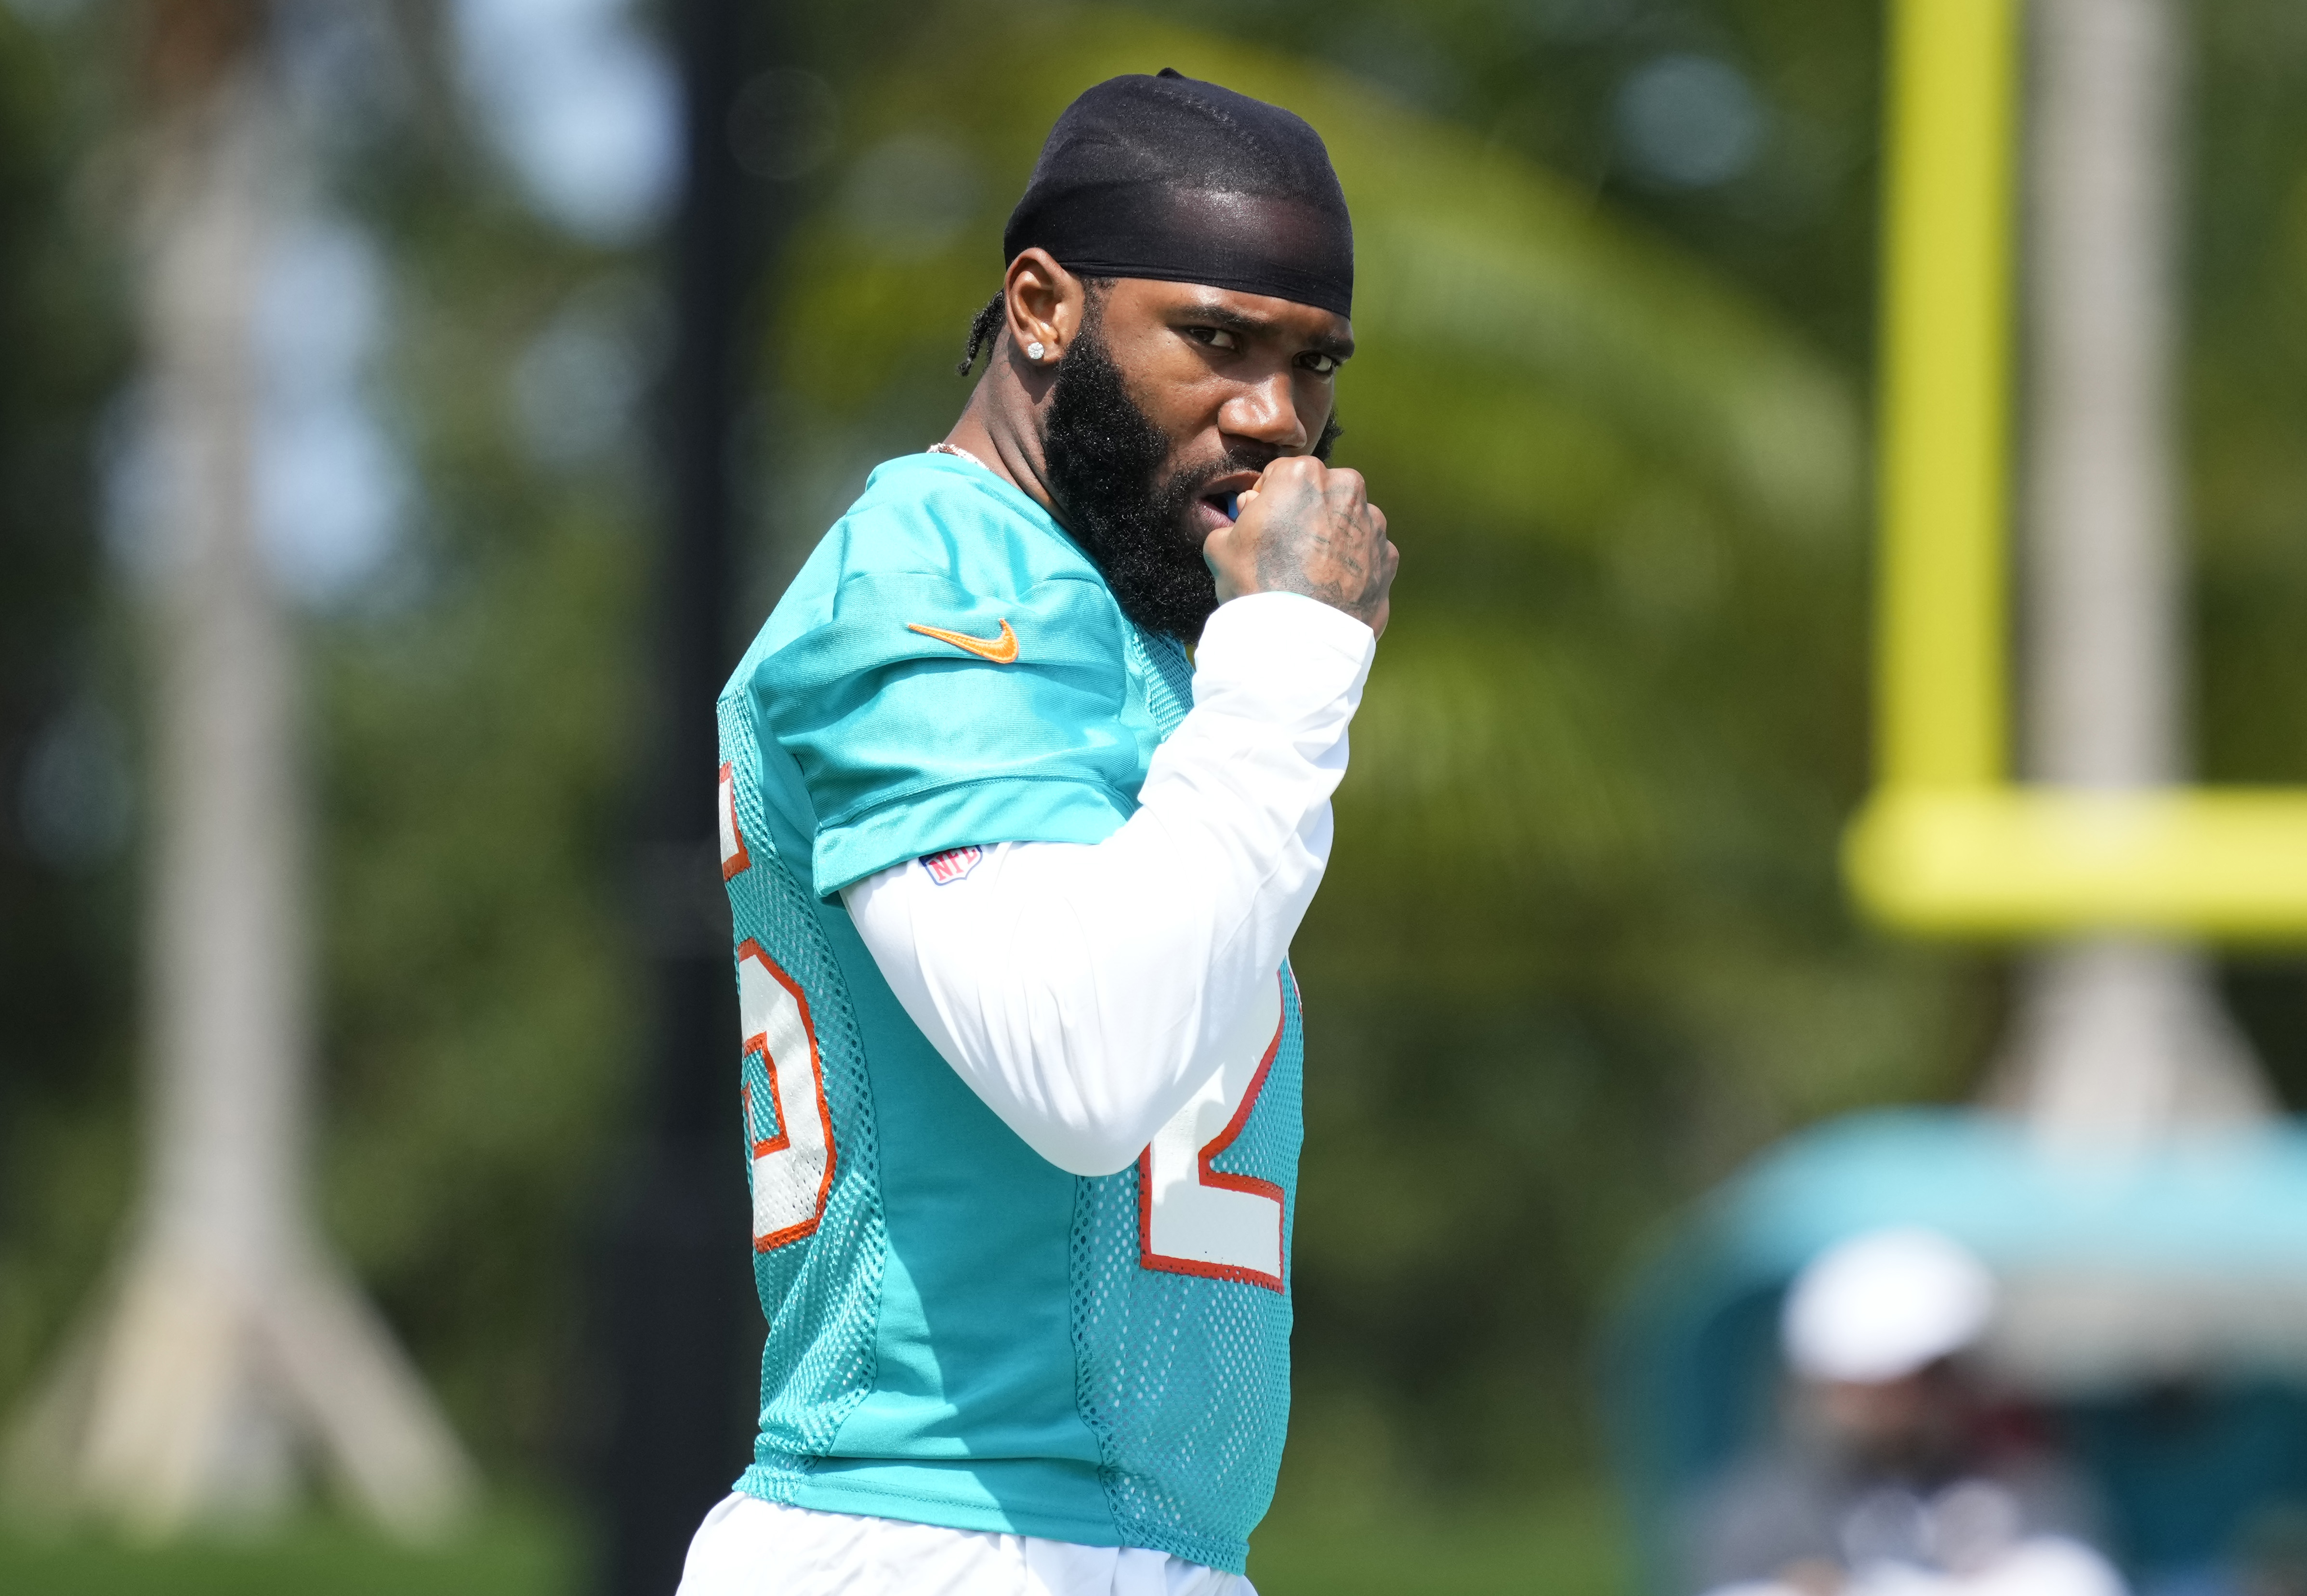 Xavien Howard on the practice field during training camp